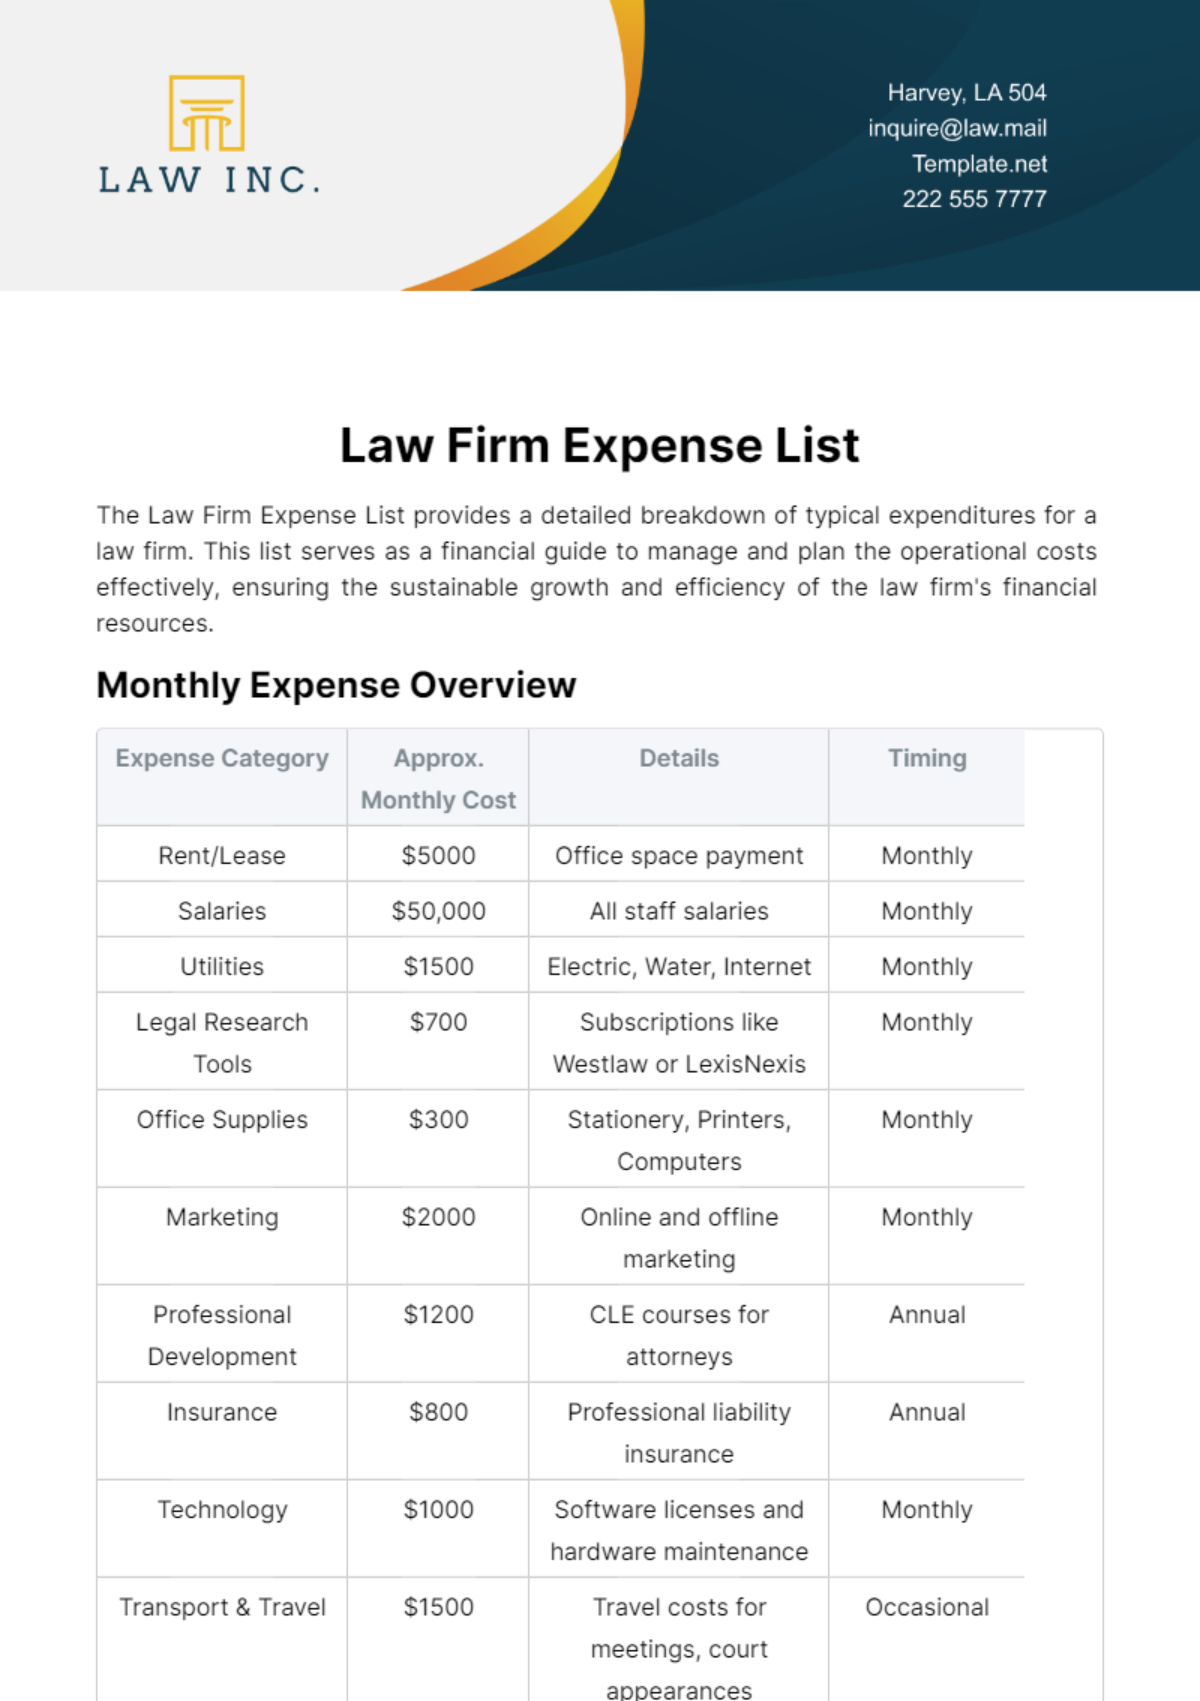 Law Firm Expense List Template